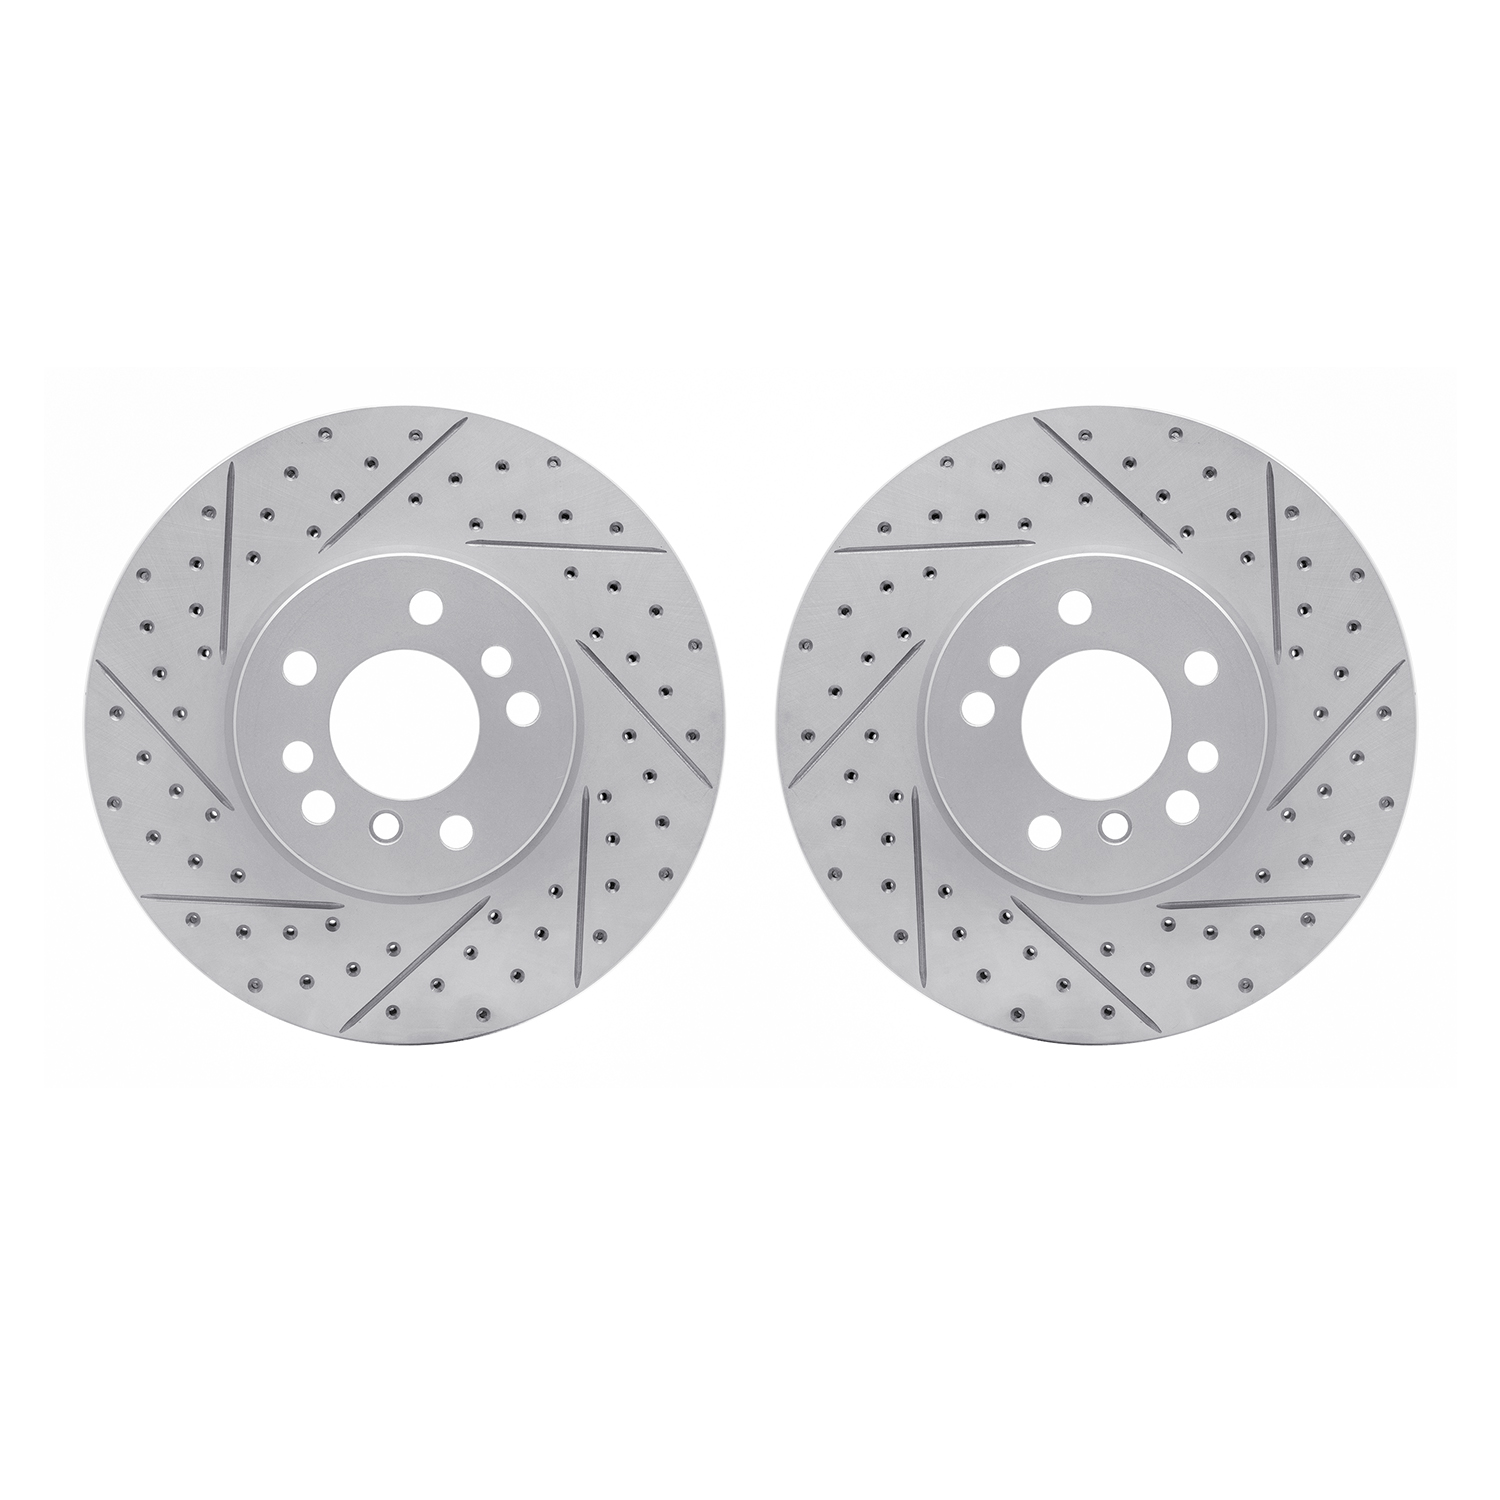 2002-31043 Geoperformance Drilled/Slotted Brake Rotors, 2000-2006 BMW, Position: Front